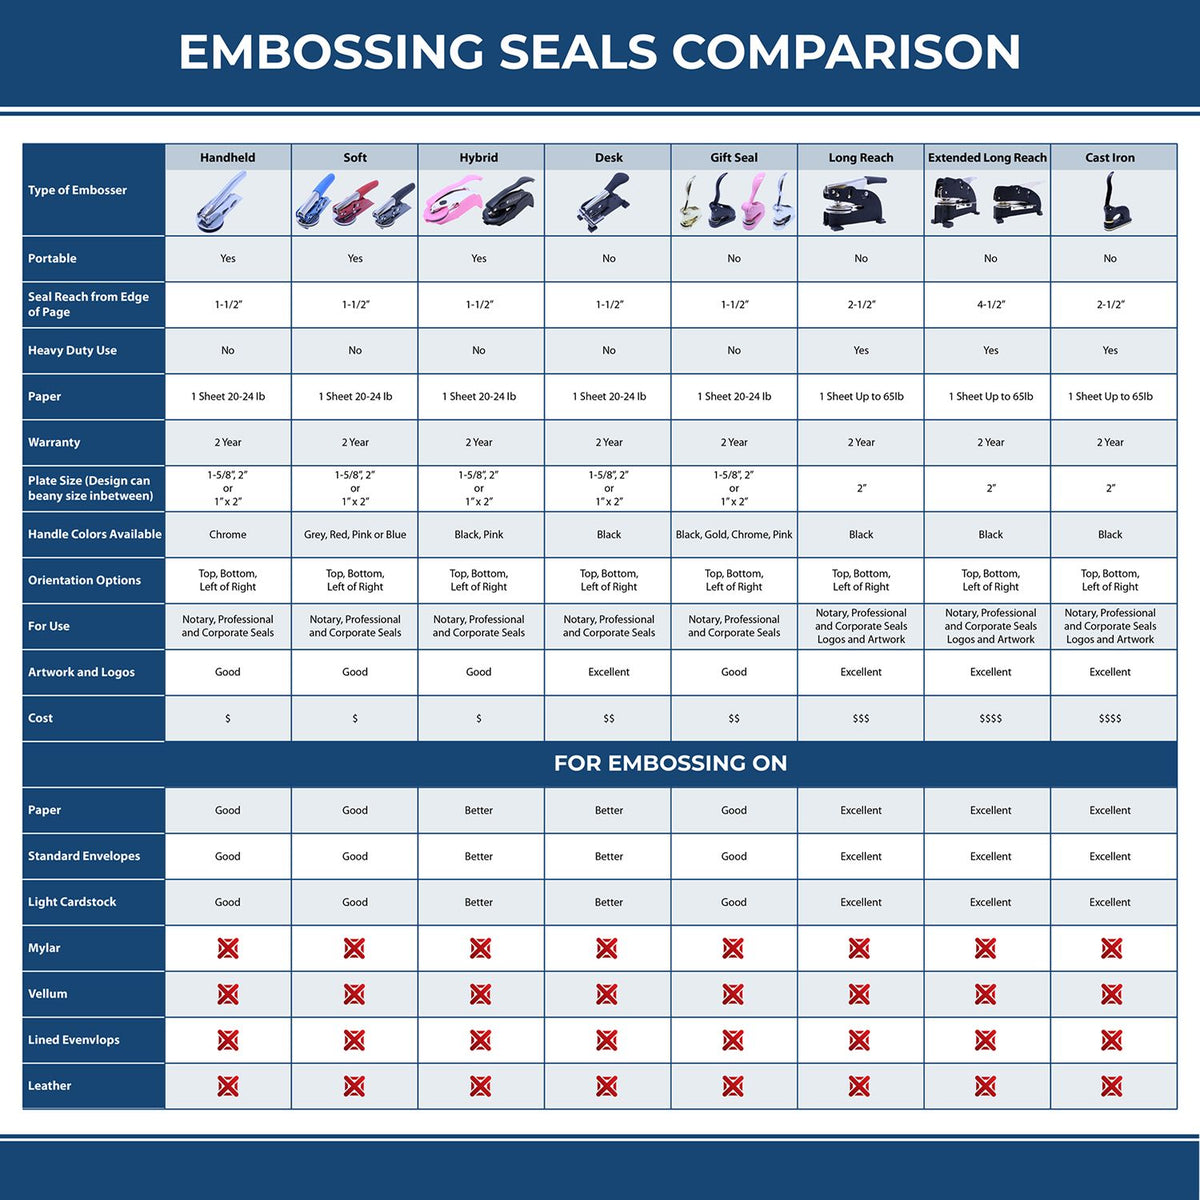 A comparison chart for the different types of mount models available for the Heavy Duty Cast Iron Alabama Architect Embosser.